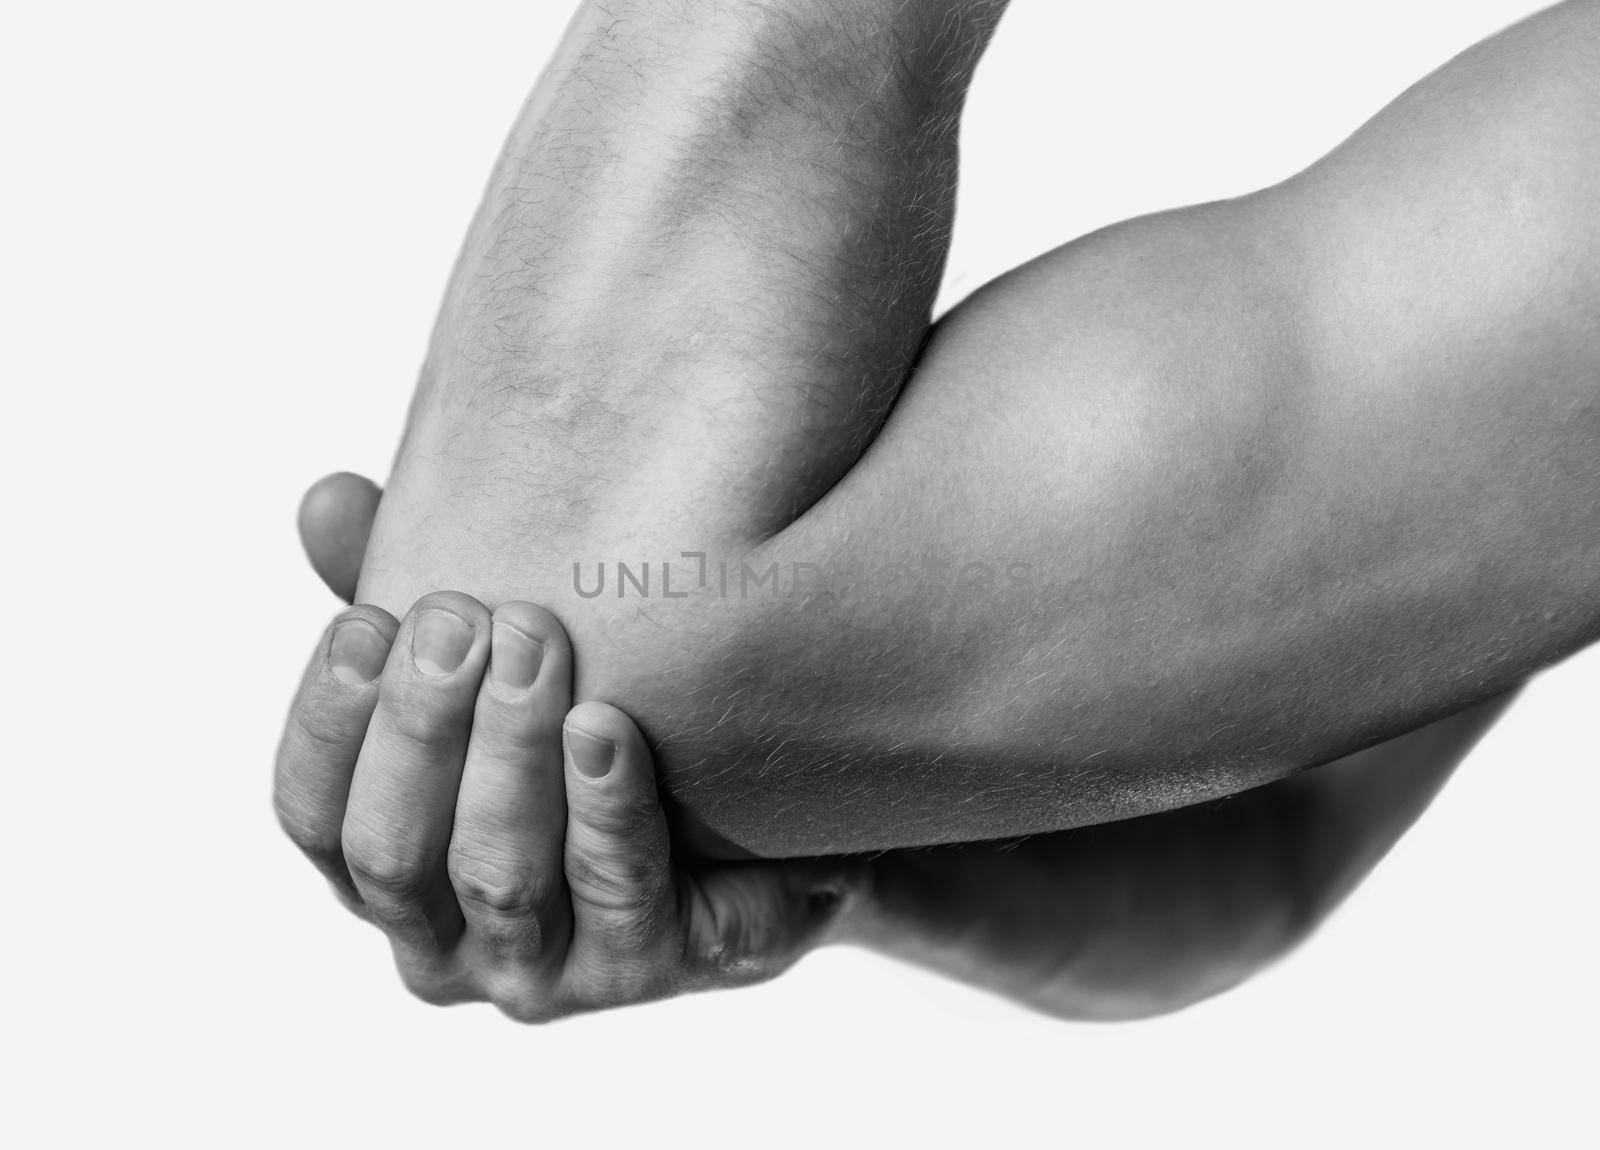 The man is touching the elbow due to acute pain. Monochrome image, isolated on a white background